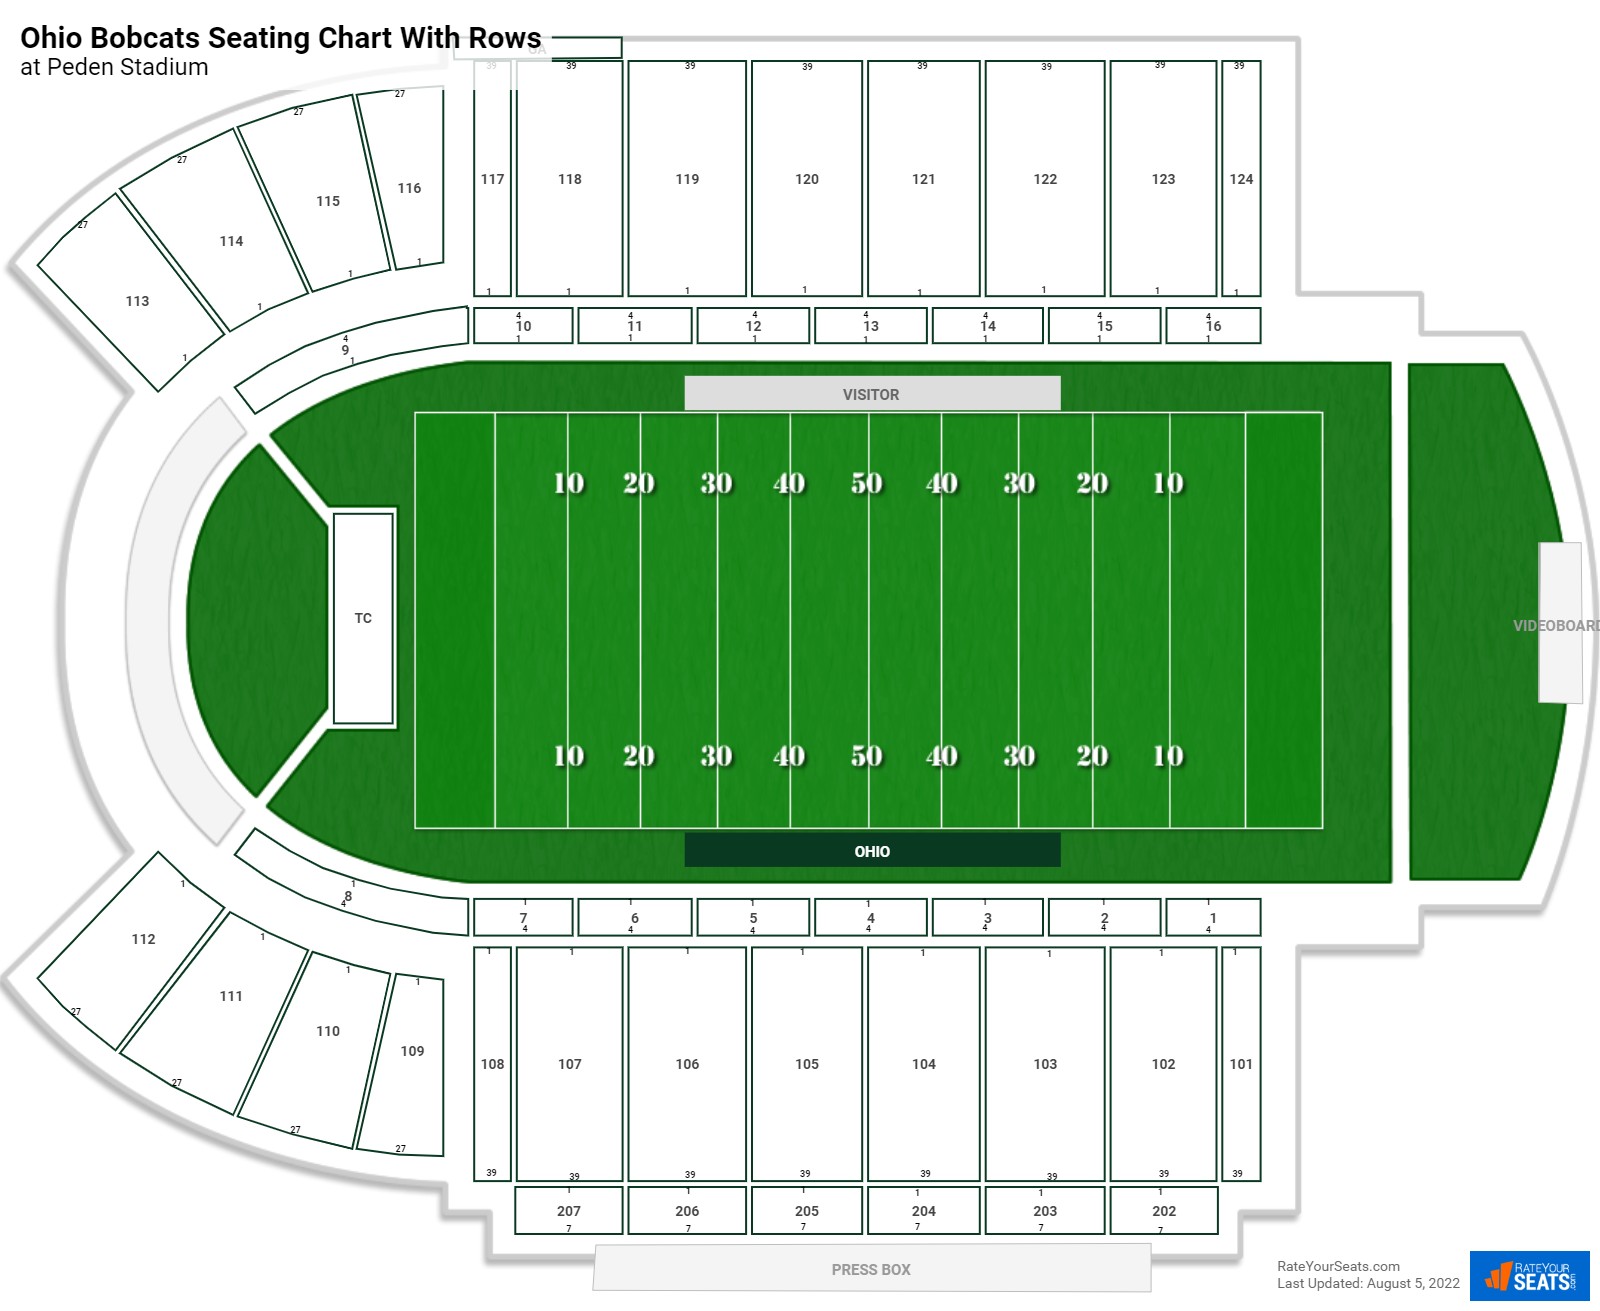 Peden Stadium seating chart with row numbers